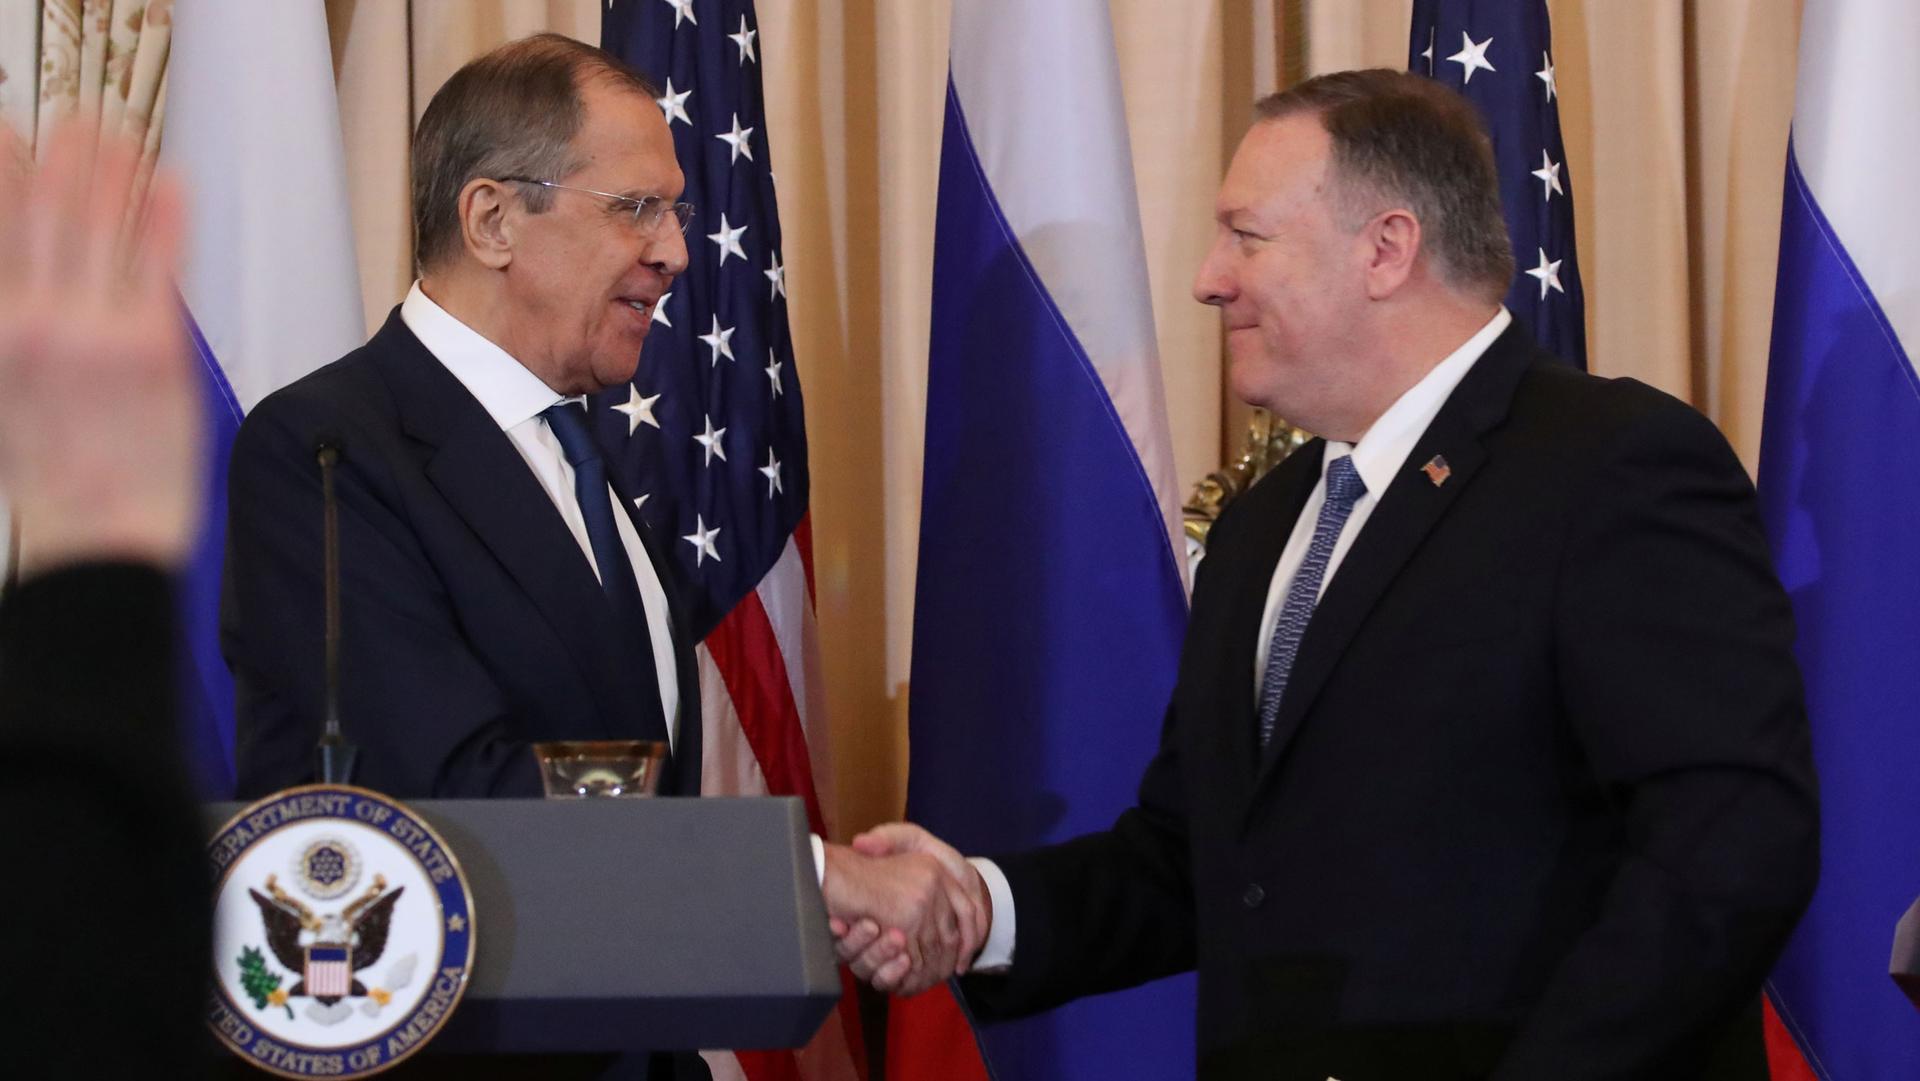 Two white men in suits shake hands, the US State Department podium is visible.